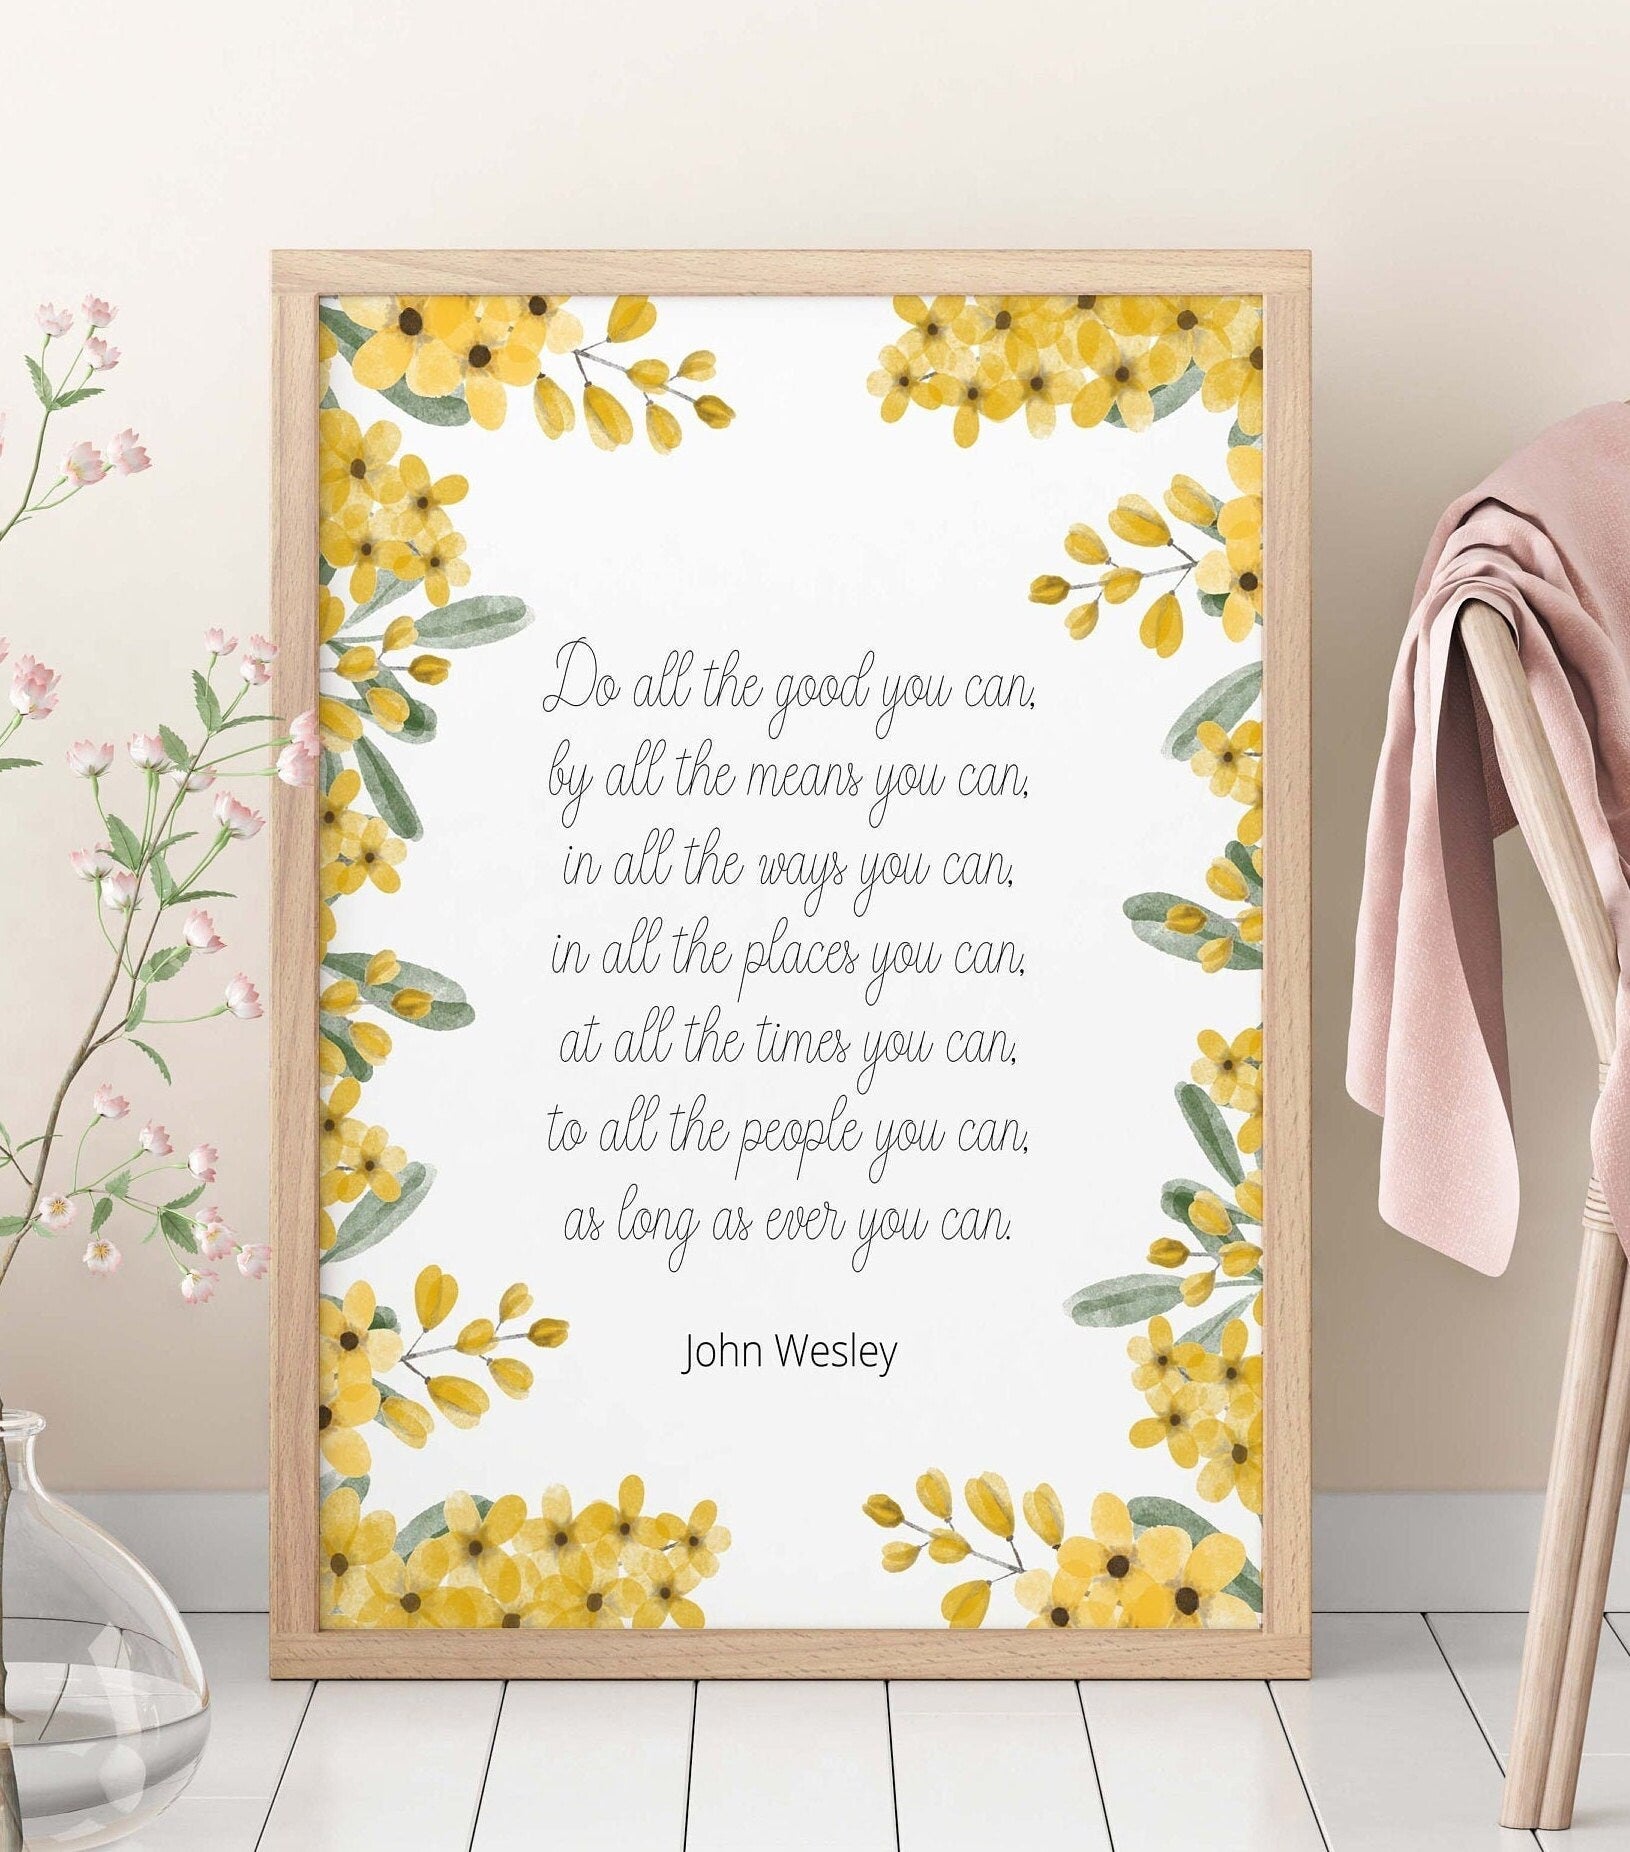 Do All The Good You Can Quote Print in White and Yellow, John Wesley Inspirational Quote Wall Art Print Unframed or Framed Art